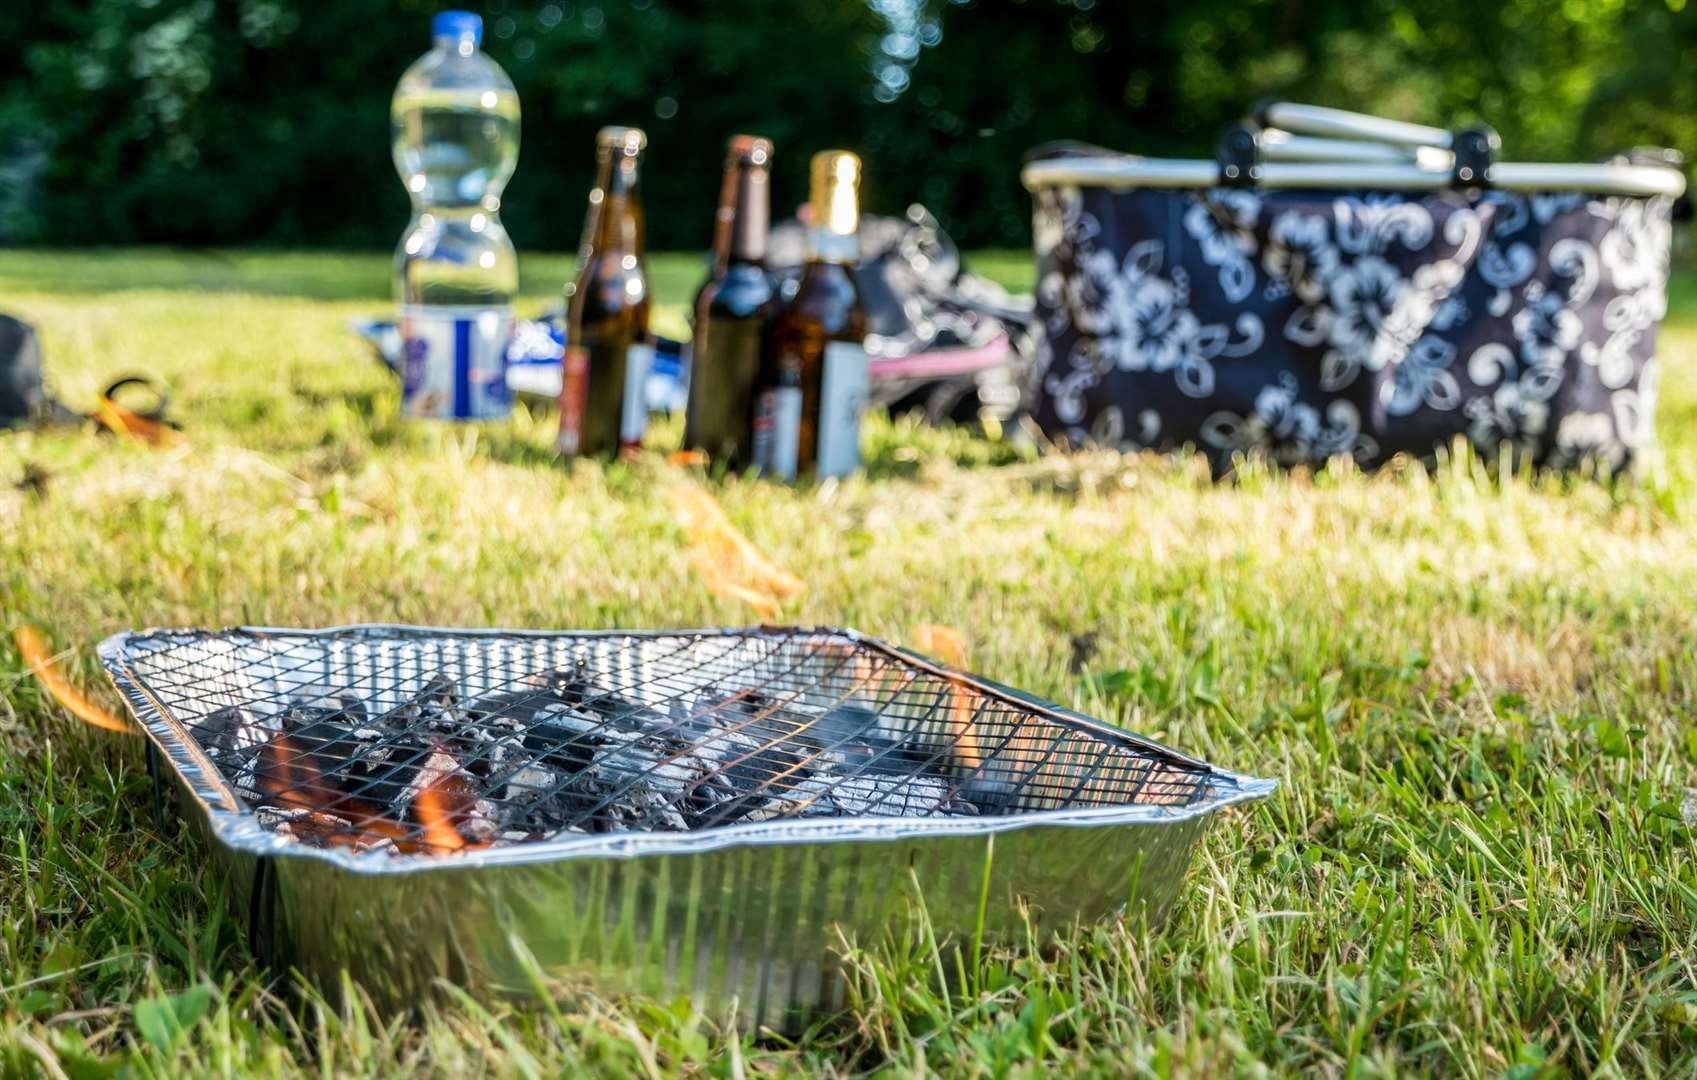 Disposable barbecues are bad for the environment, says one reader